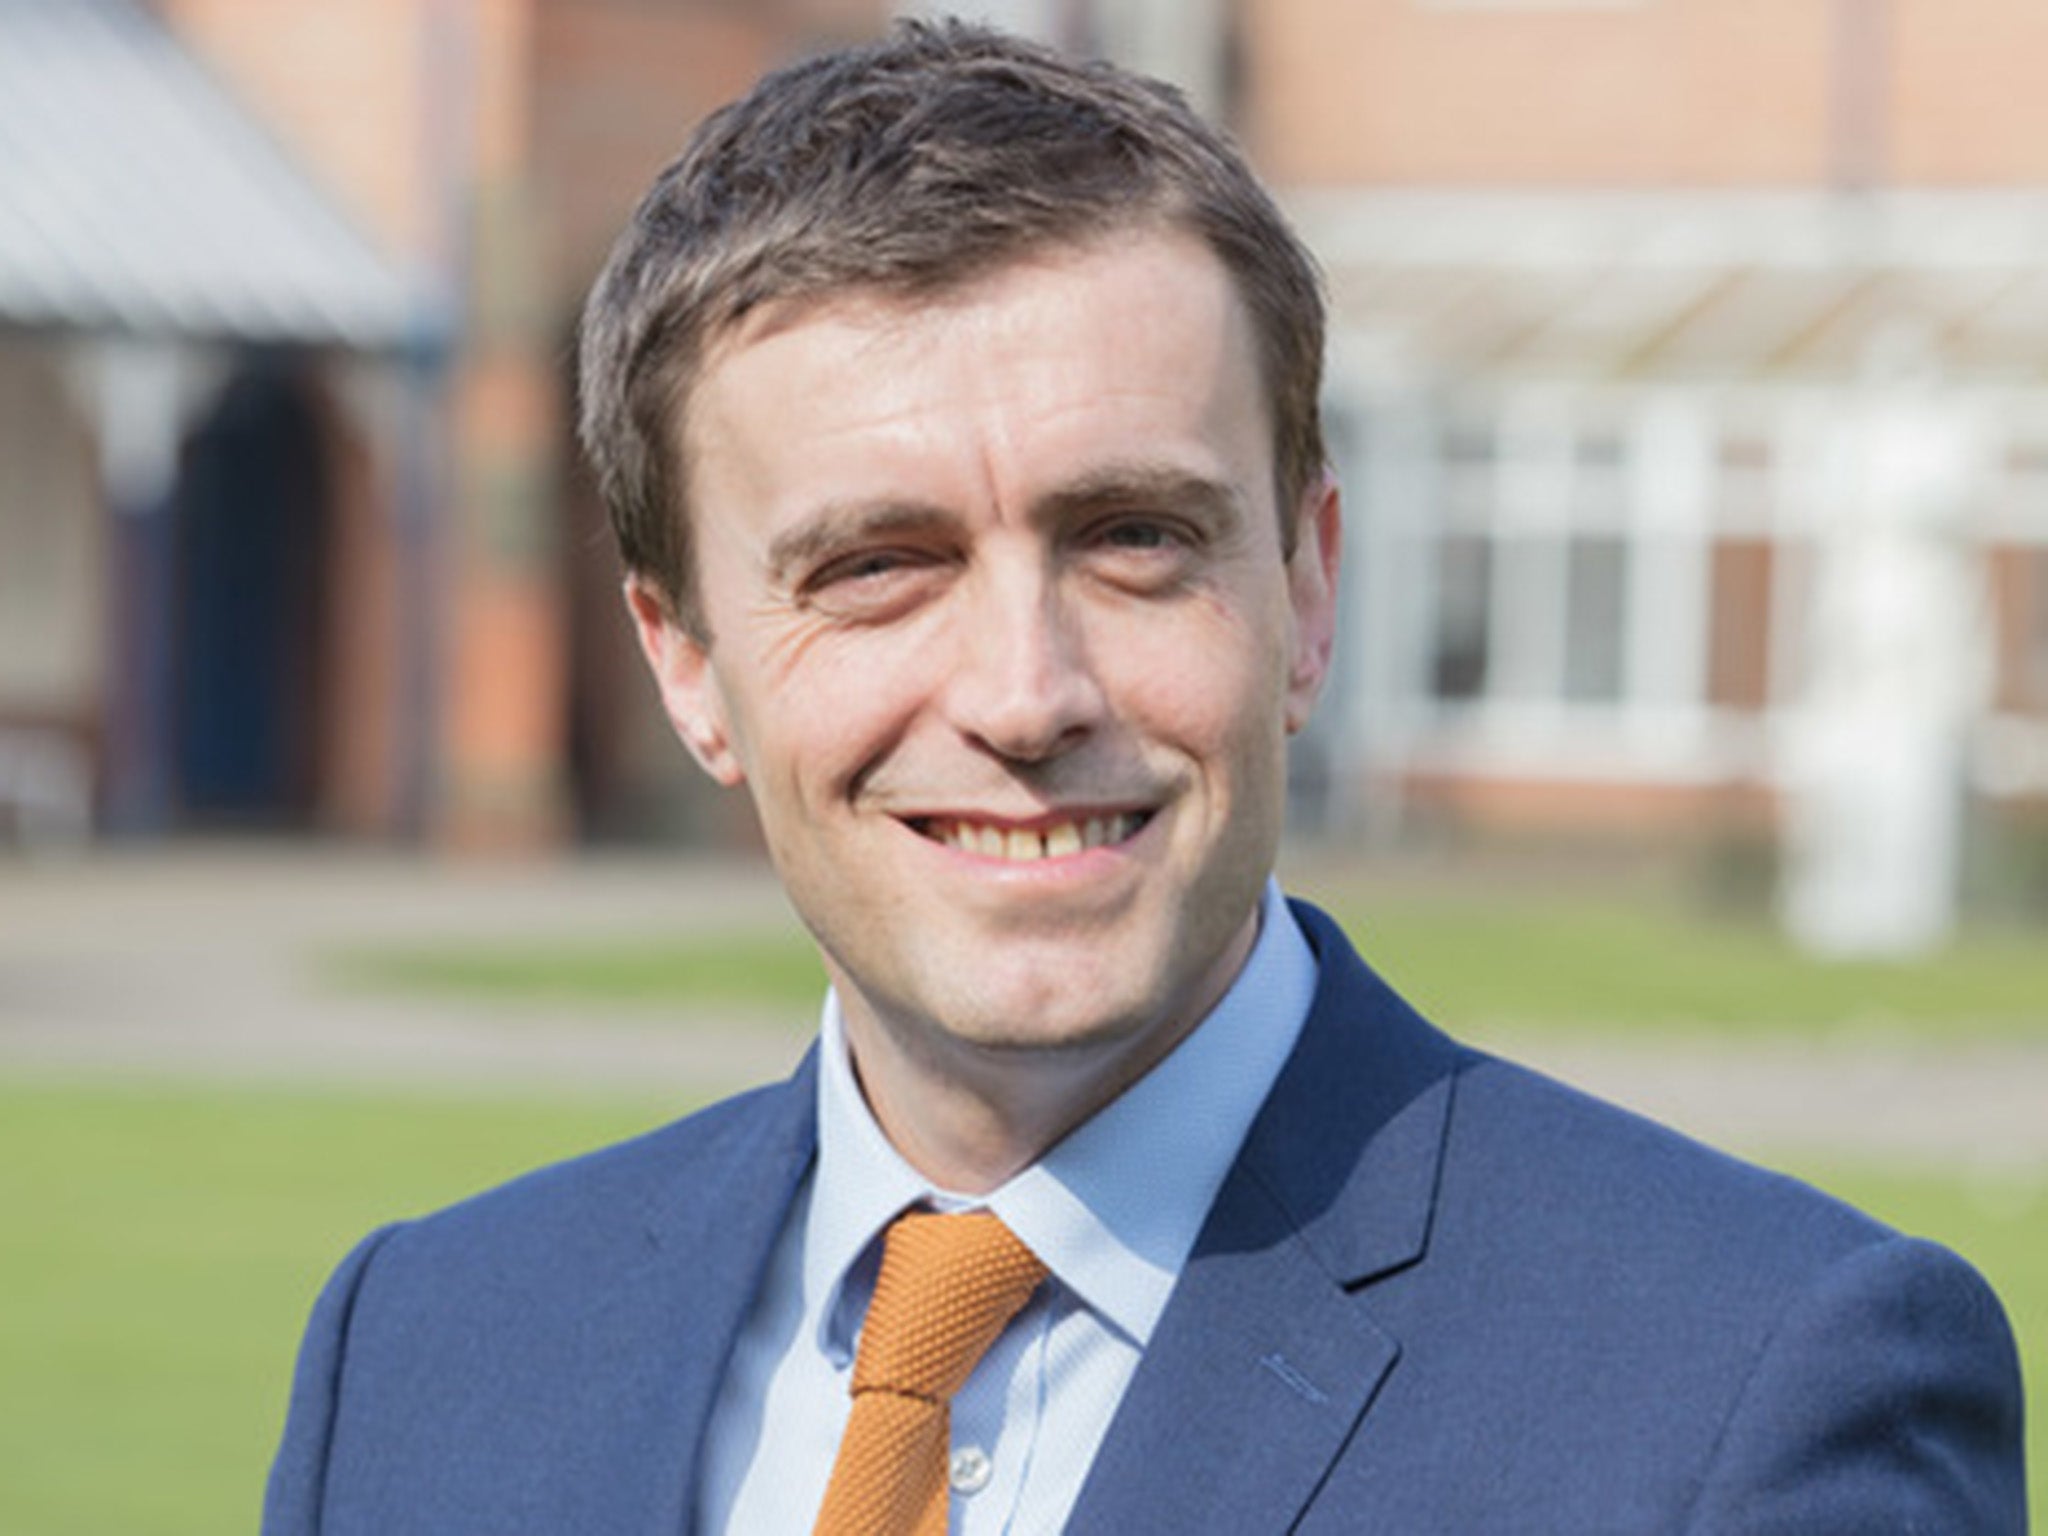 Dr Julian Murphy, head of Our Lady’s Convent School in Loughborough, says traditional school reports are too 'emotive' and often fail to be honest